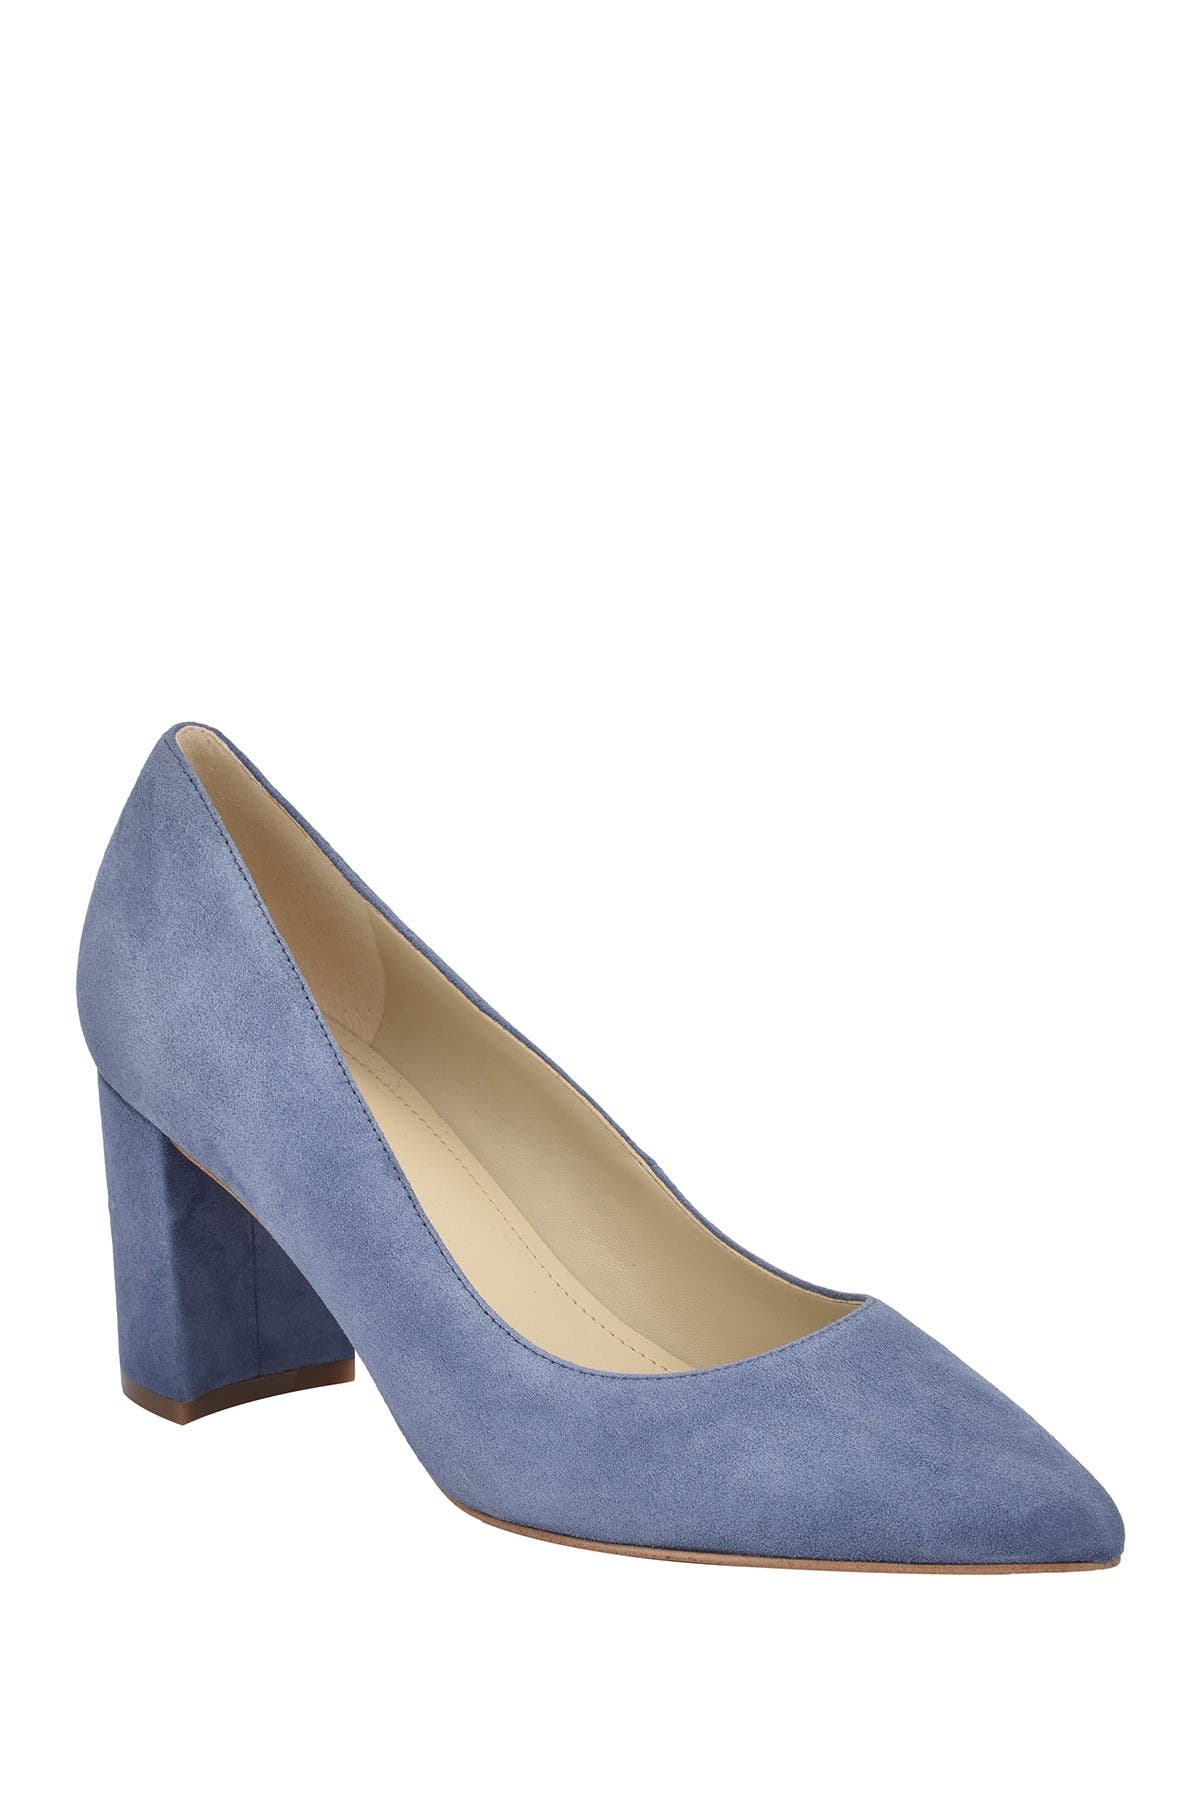 Marc Fisher | Claire Pointed Toe Pump 